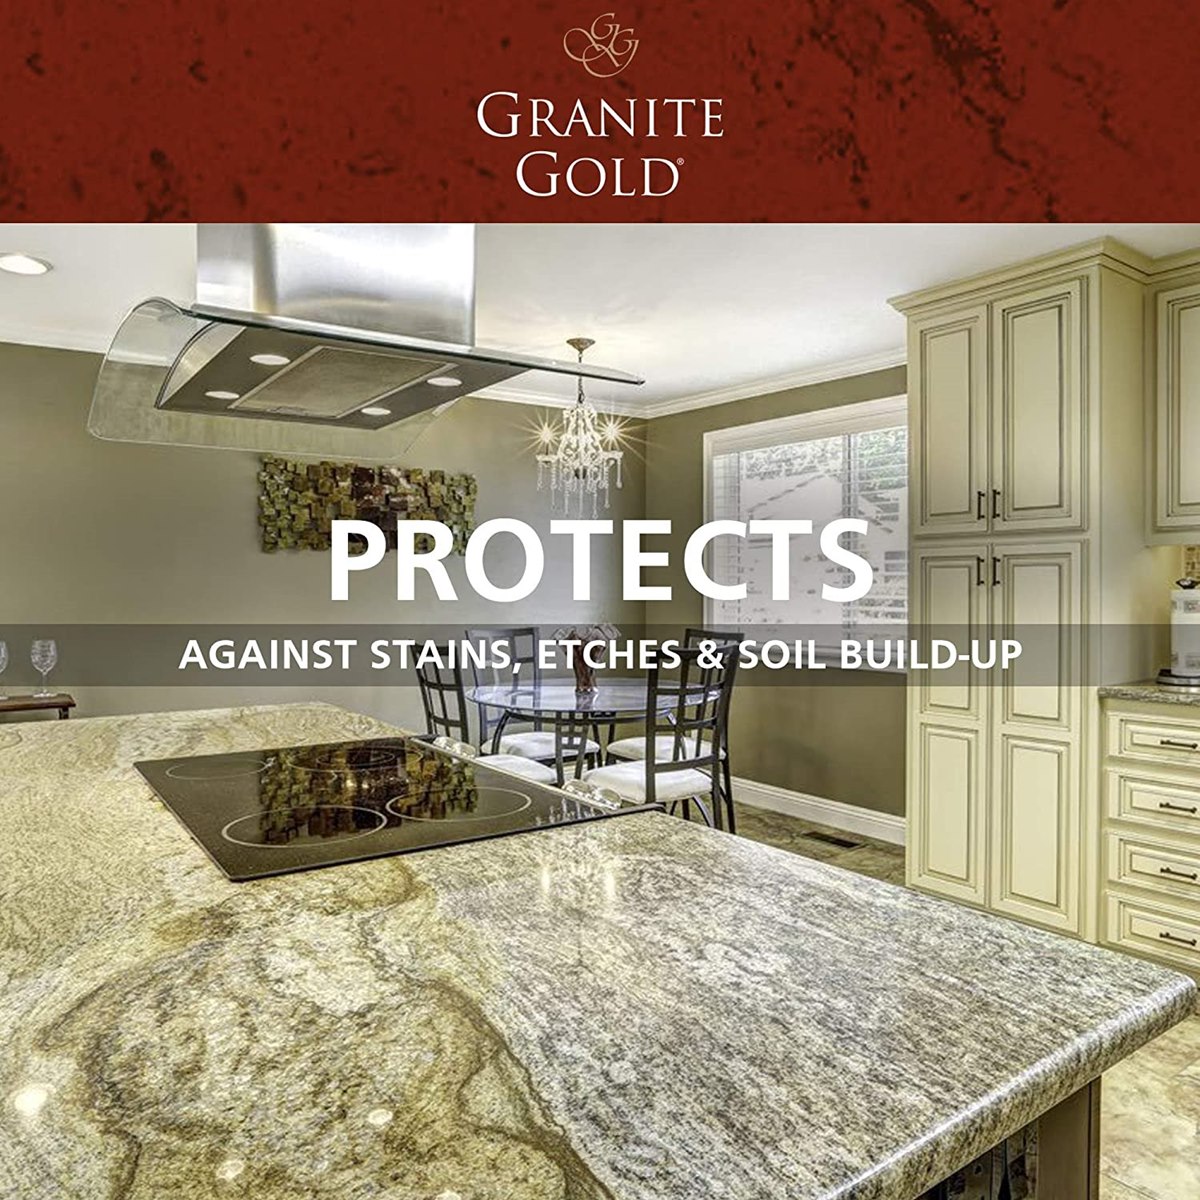 How to Protect a Granite Worktop against stains